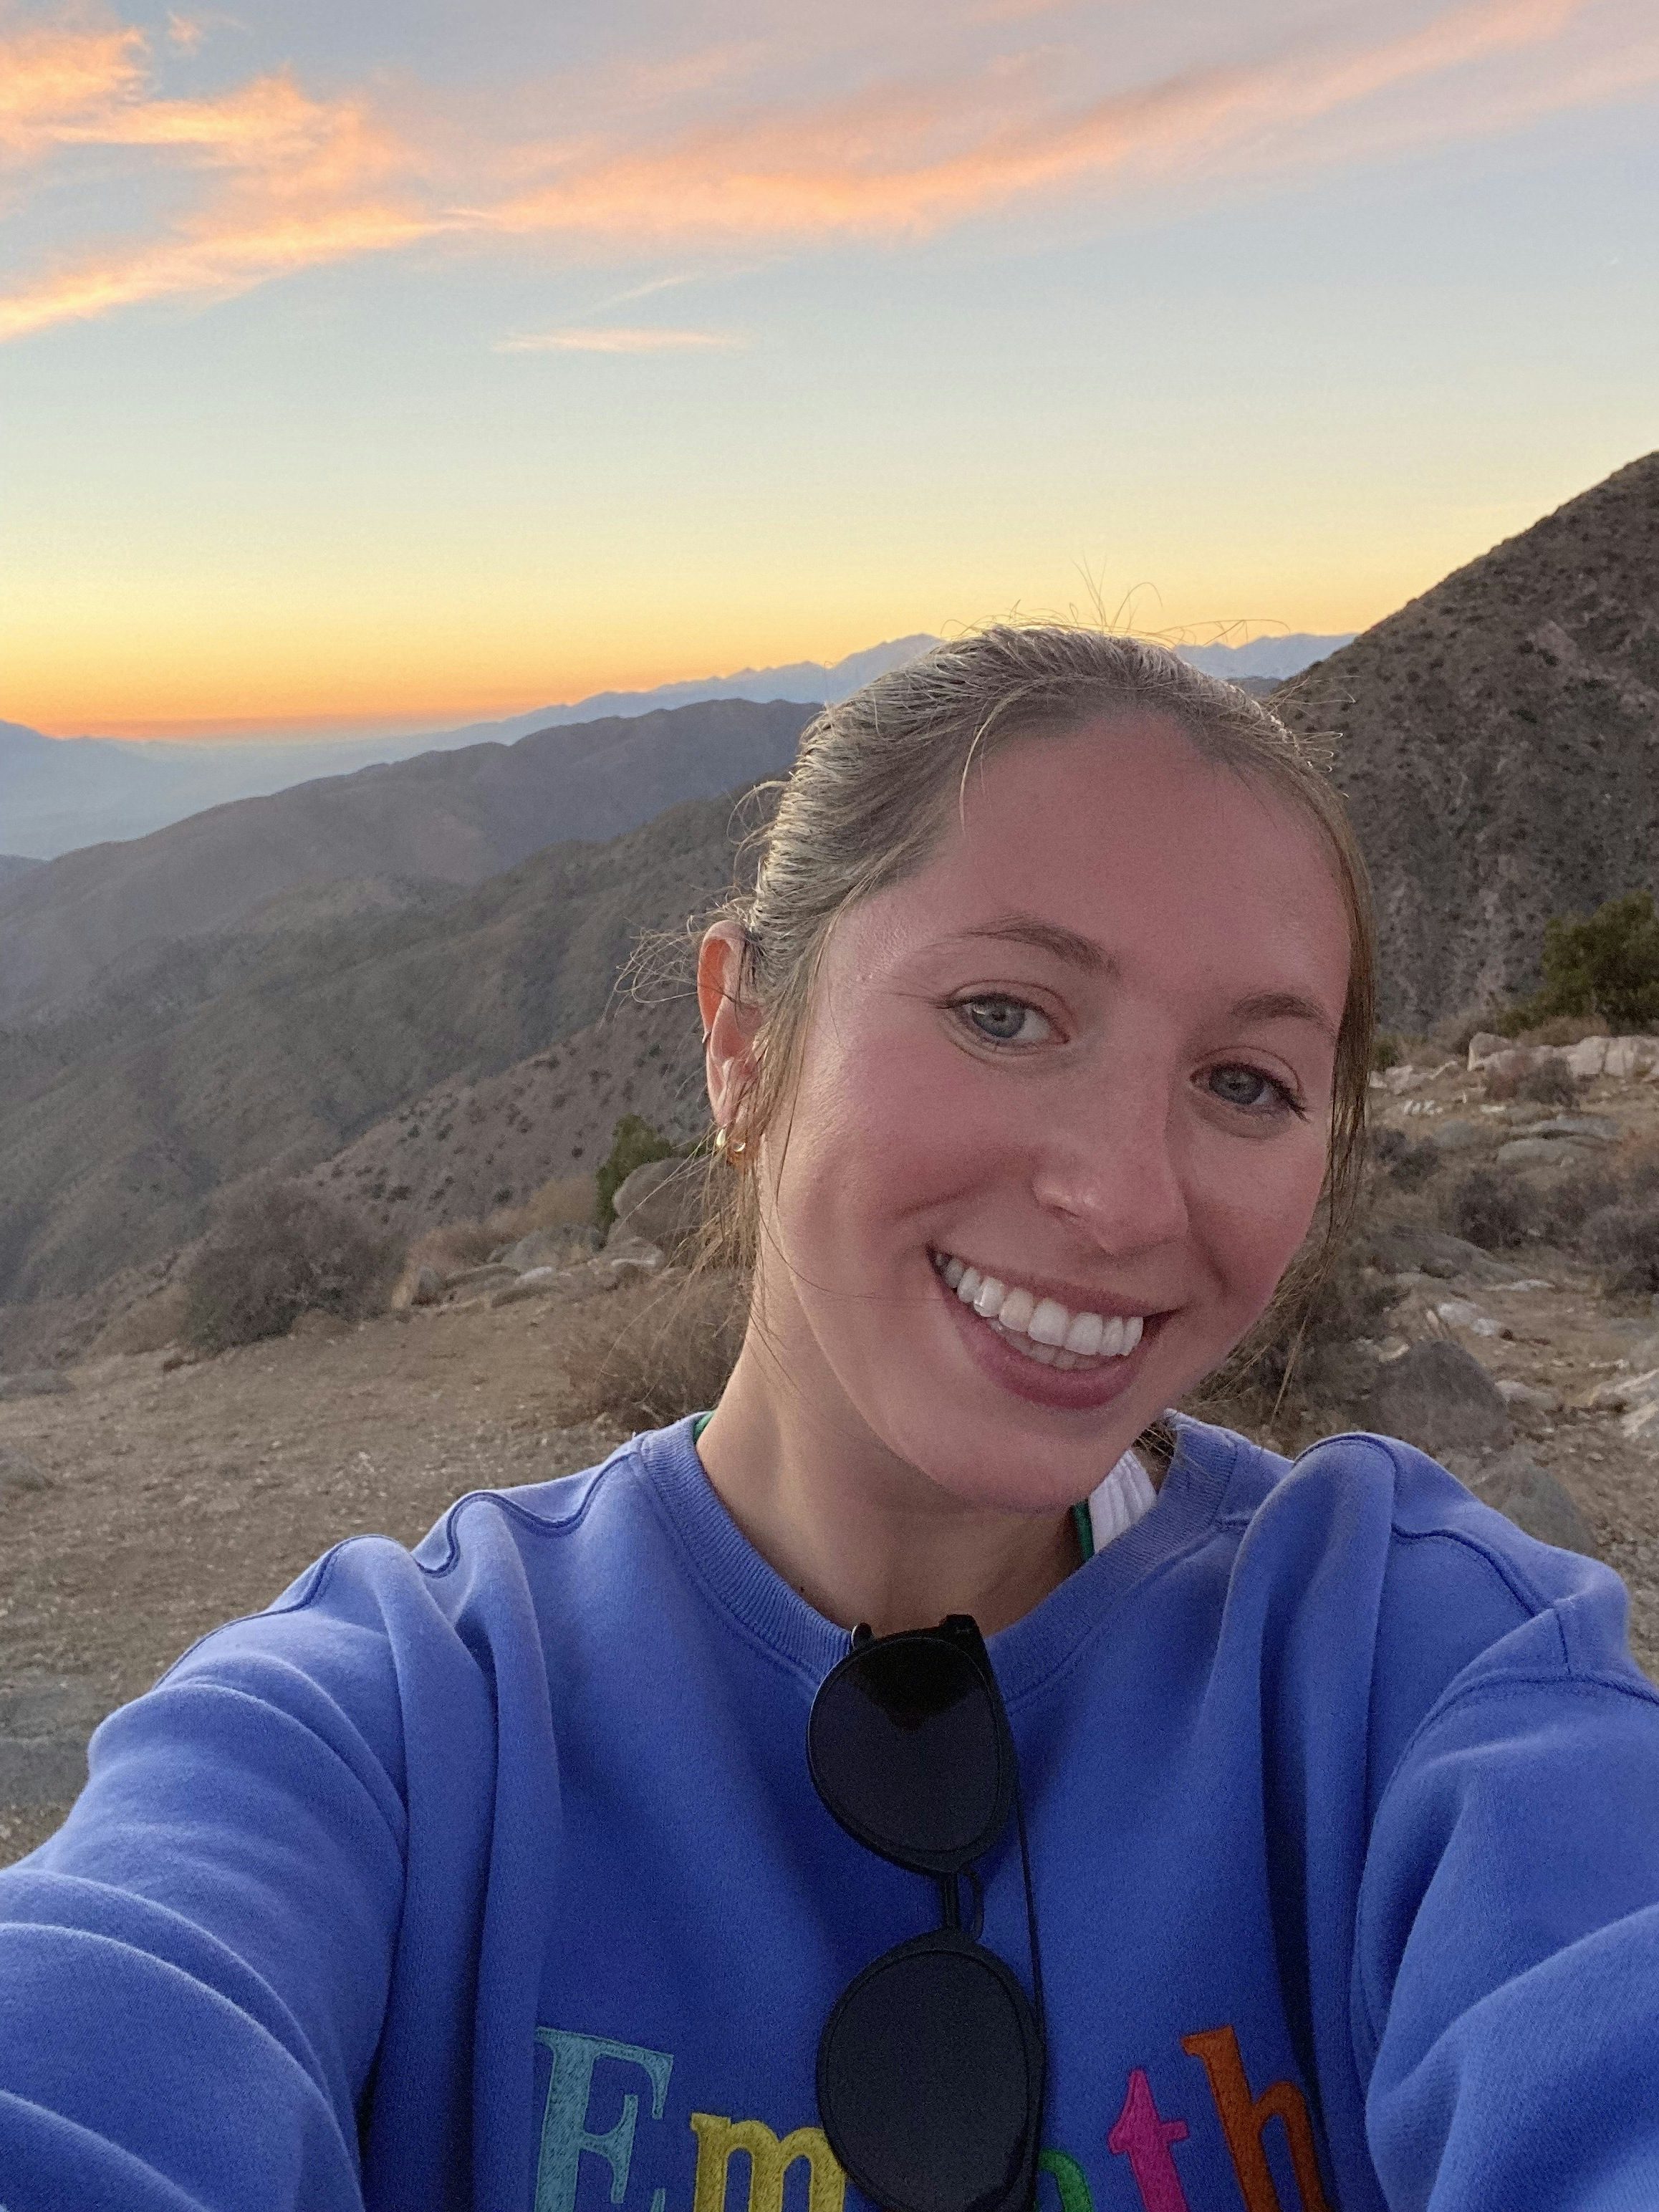 Travel Advisor Meryl Honig with a blue sweatshirt at sunset in the mountains.